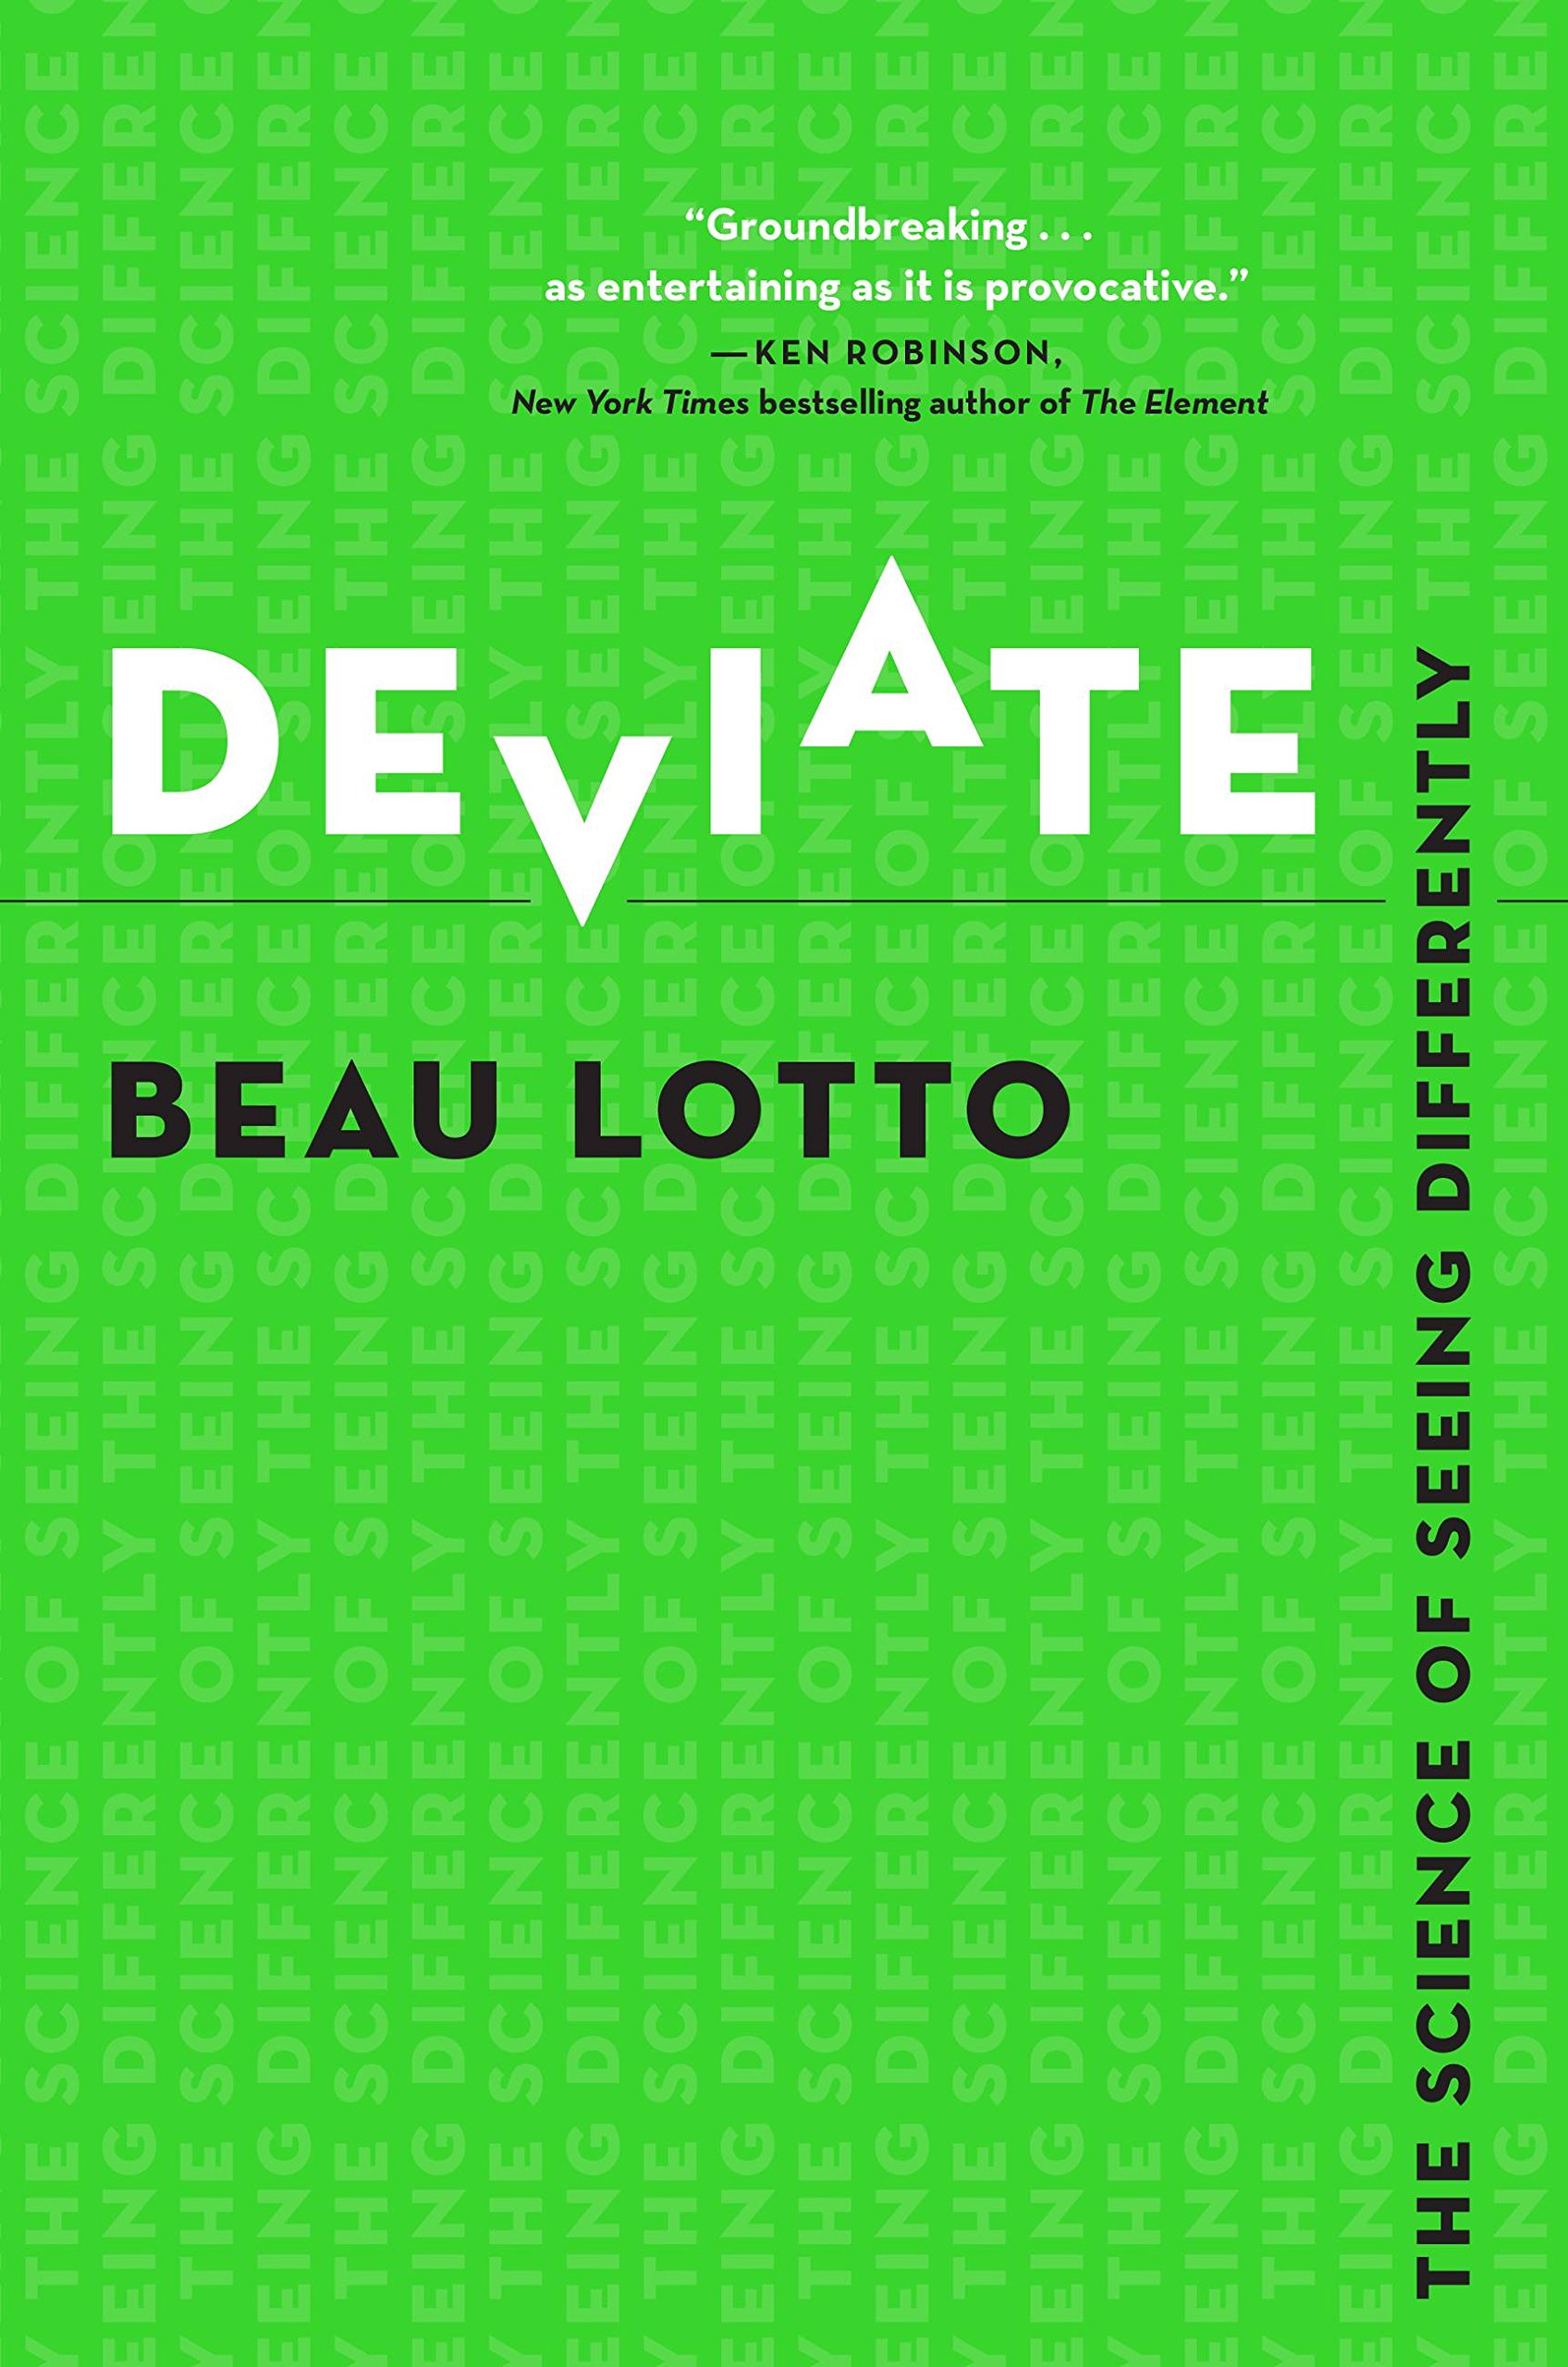 Deviate: The Science of Seeing Differently